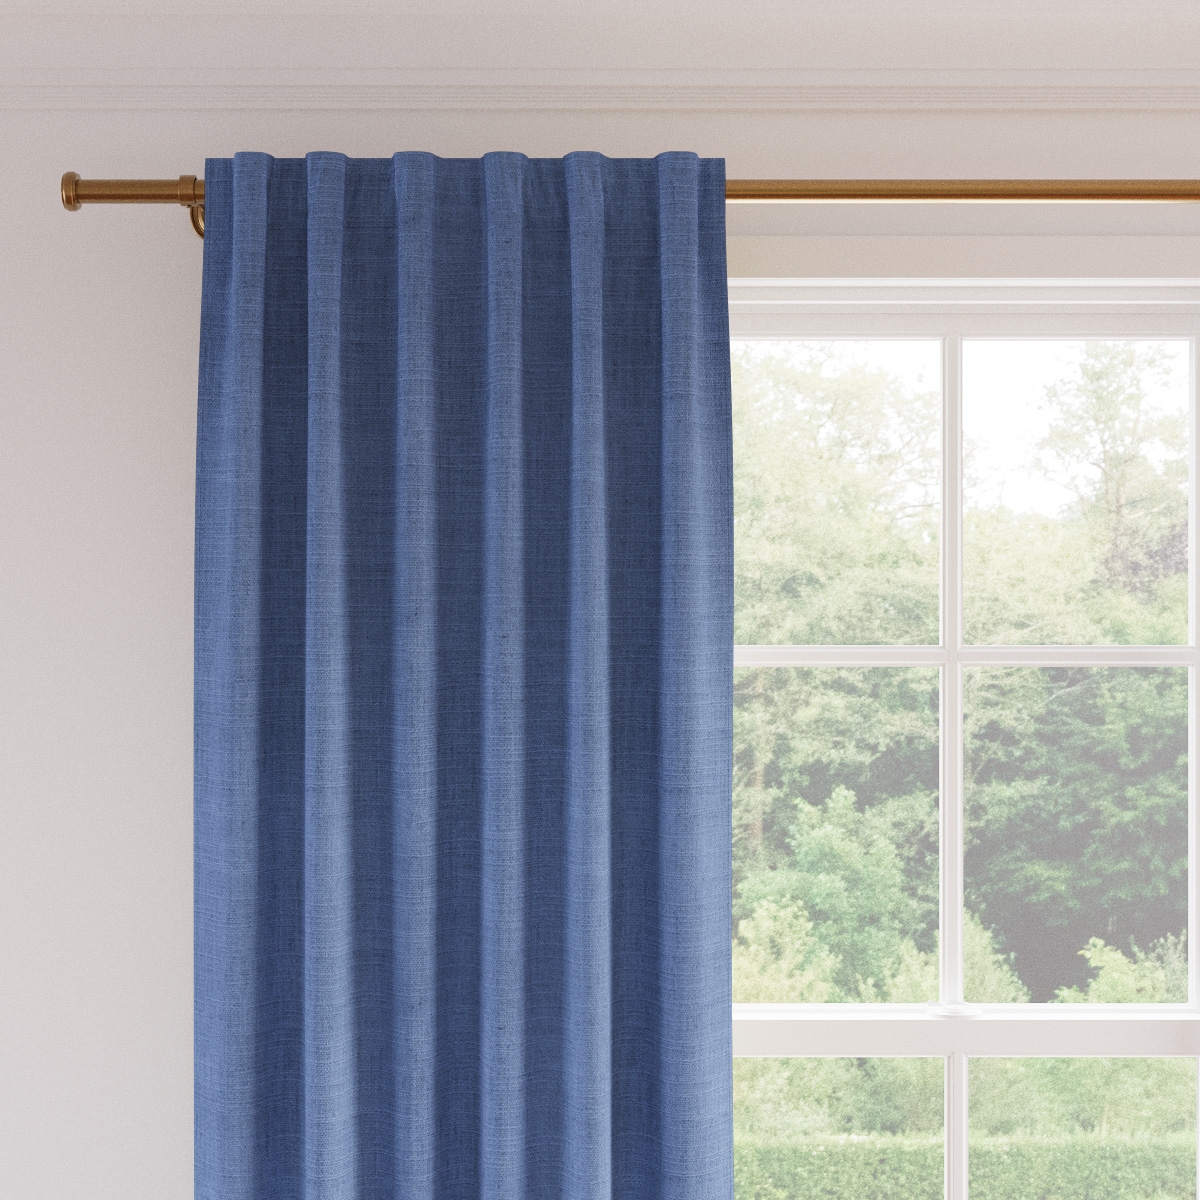 Linen Curtain, French Blue Linen, 50" x 96", Privacy - Image 1